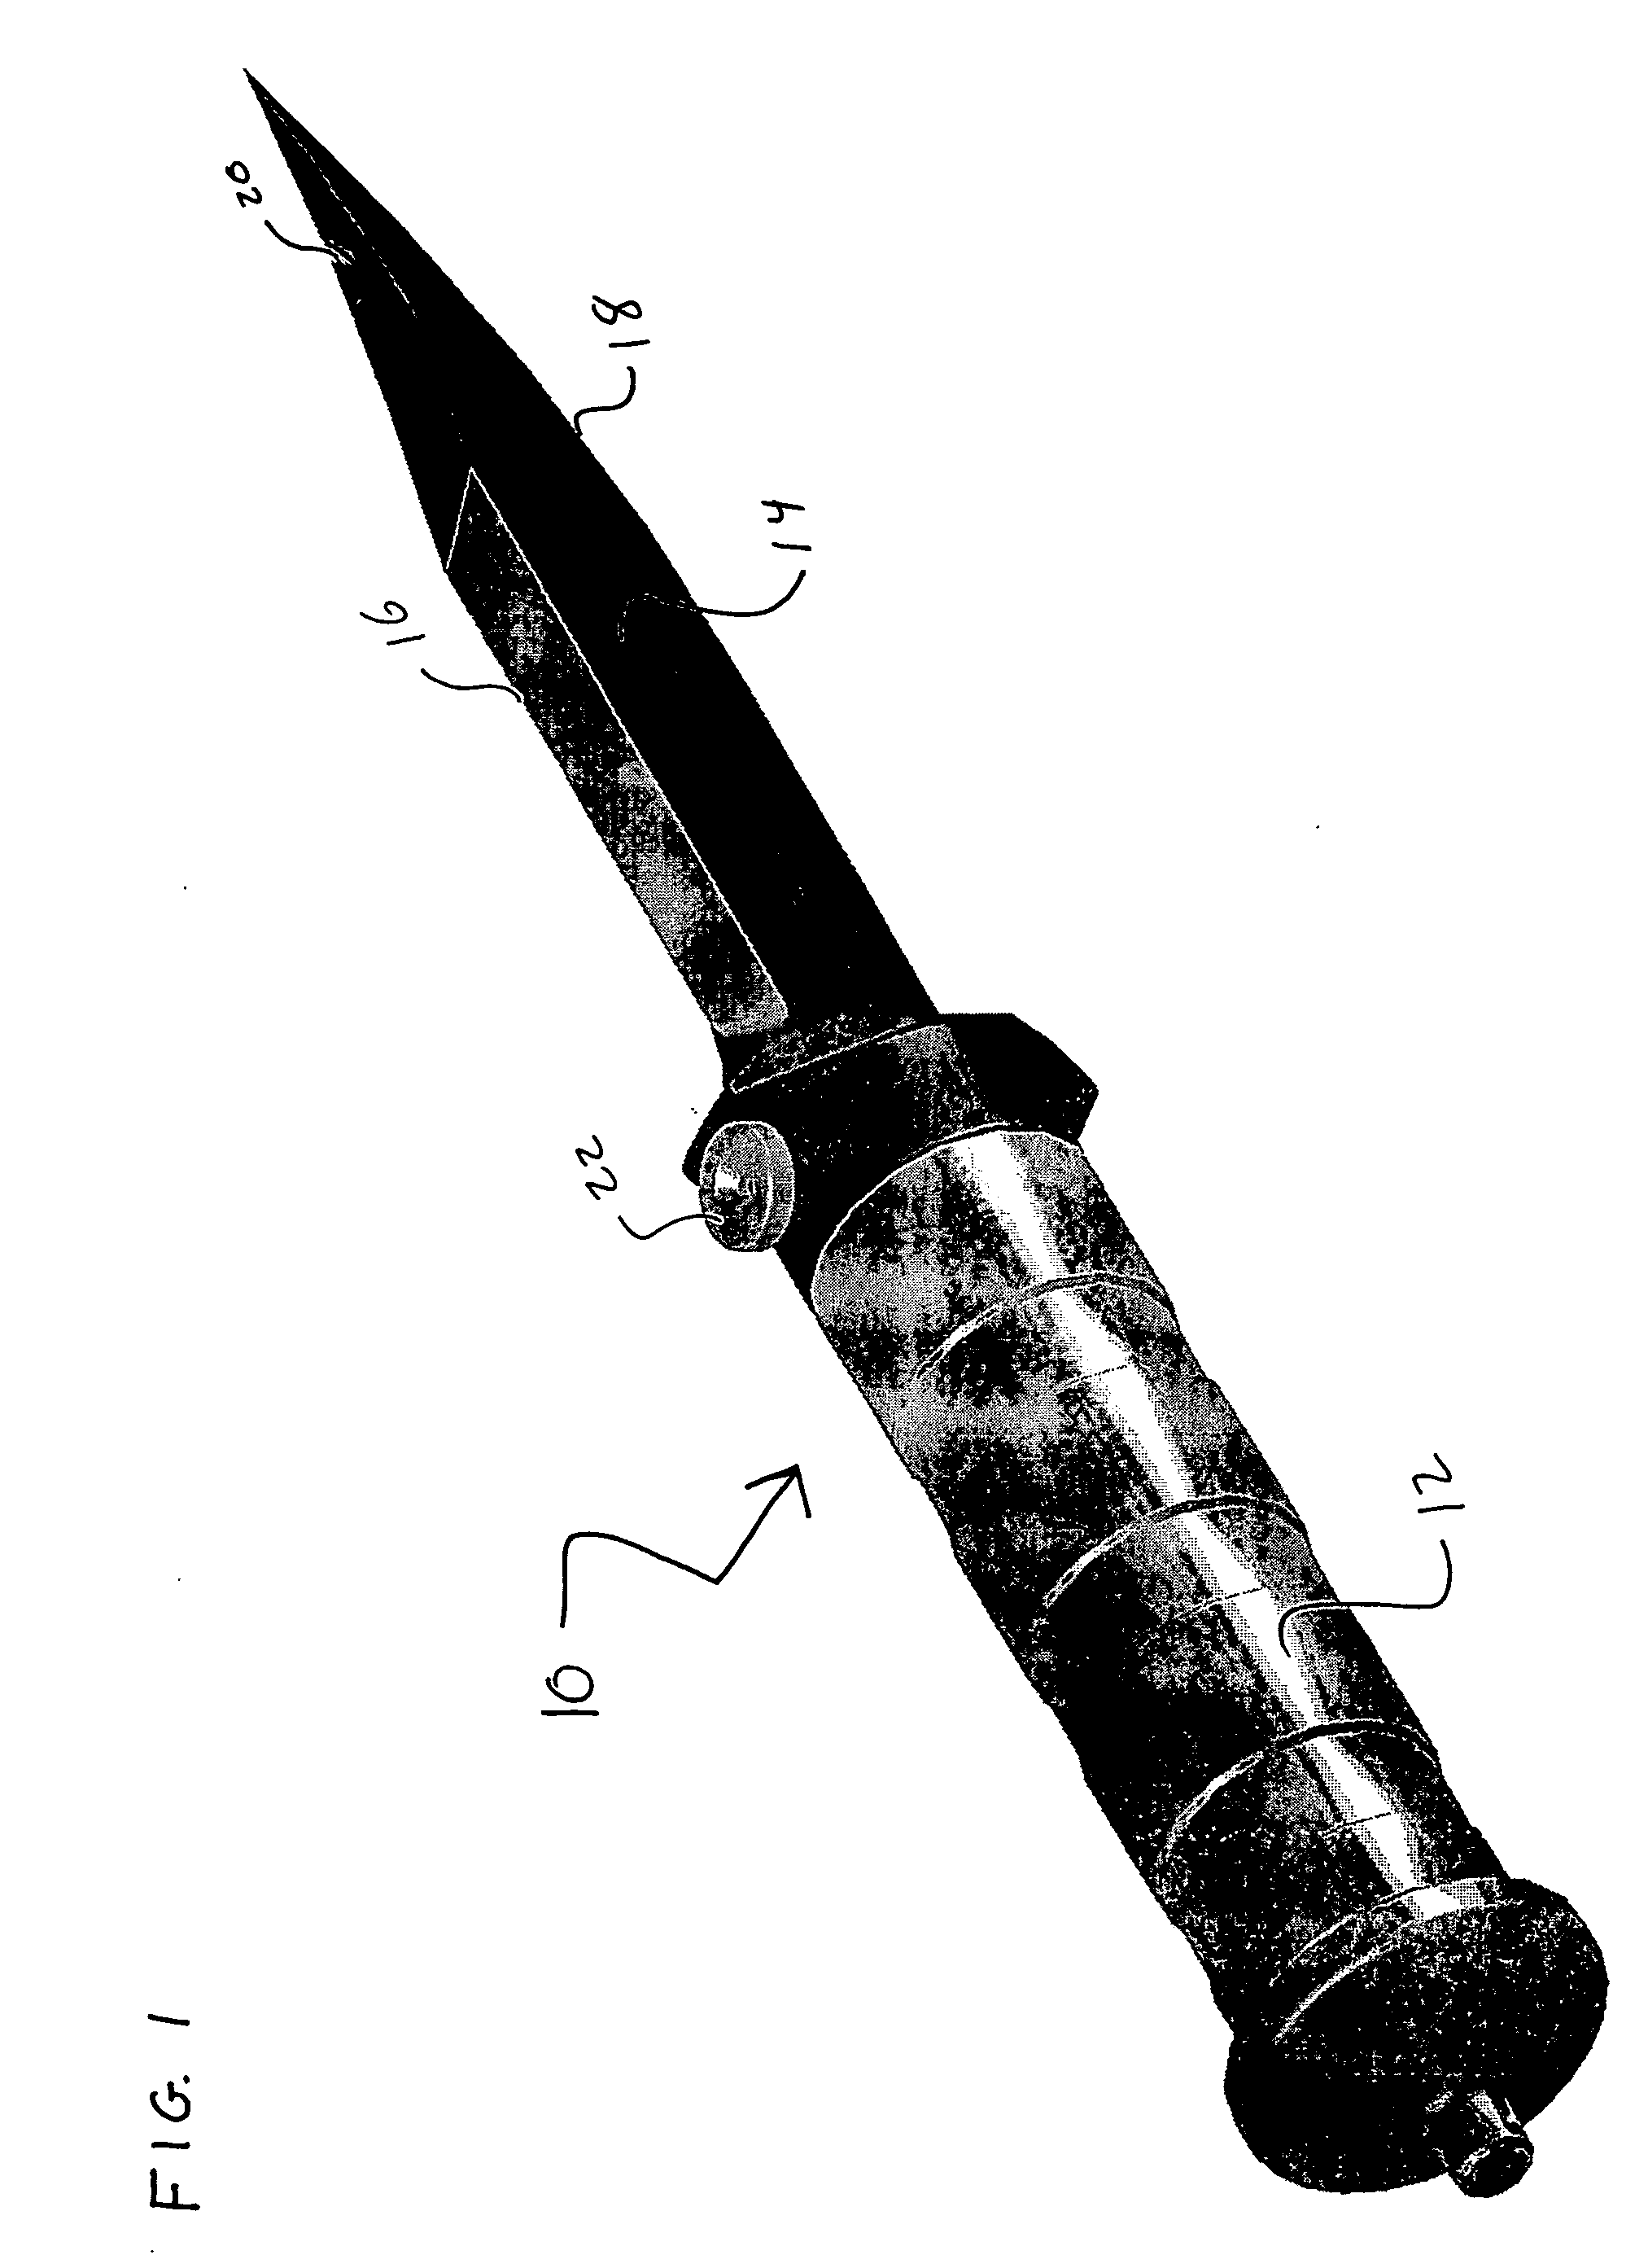 Method and device for using compressed gas as a weapon